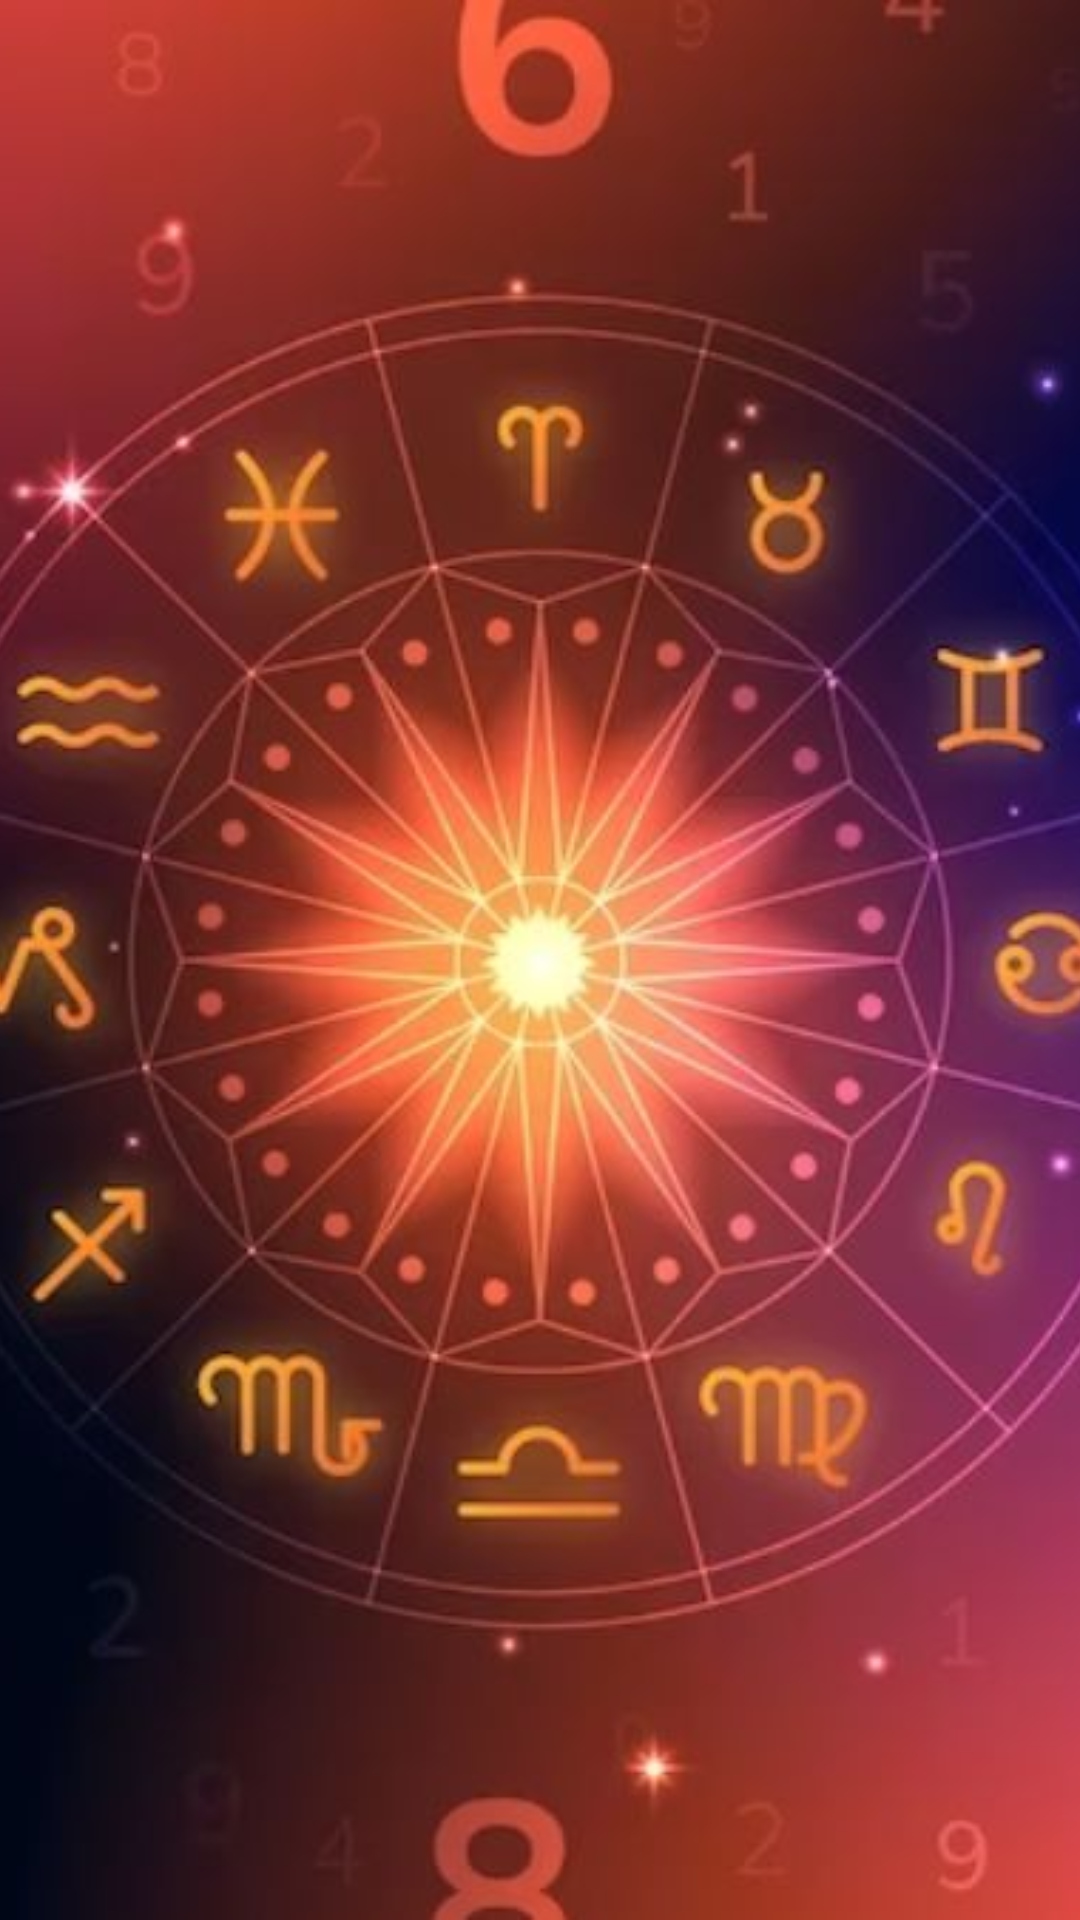 Know lucky colour and number for all zodiac signs in your horoscope for ...